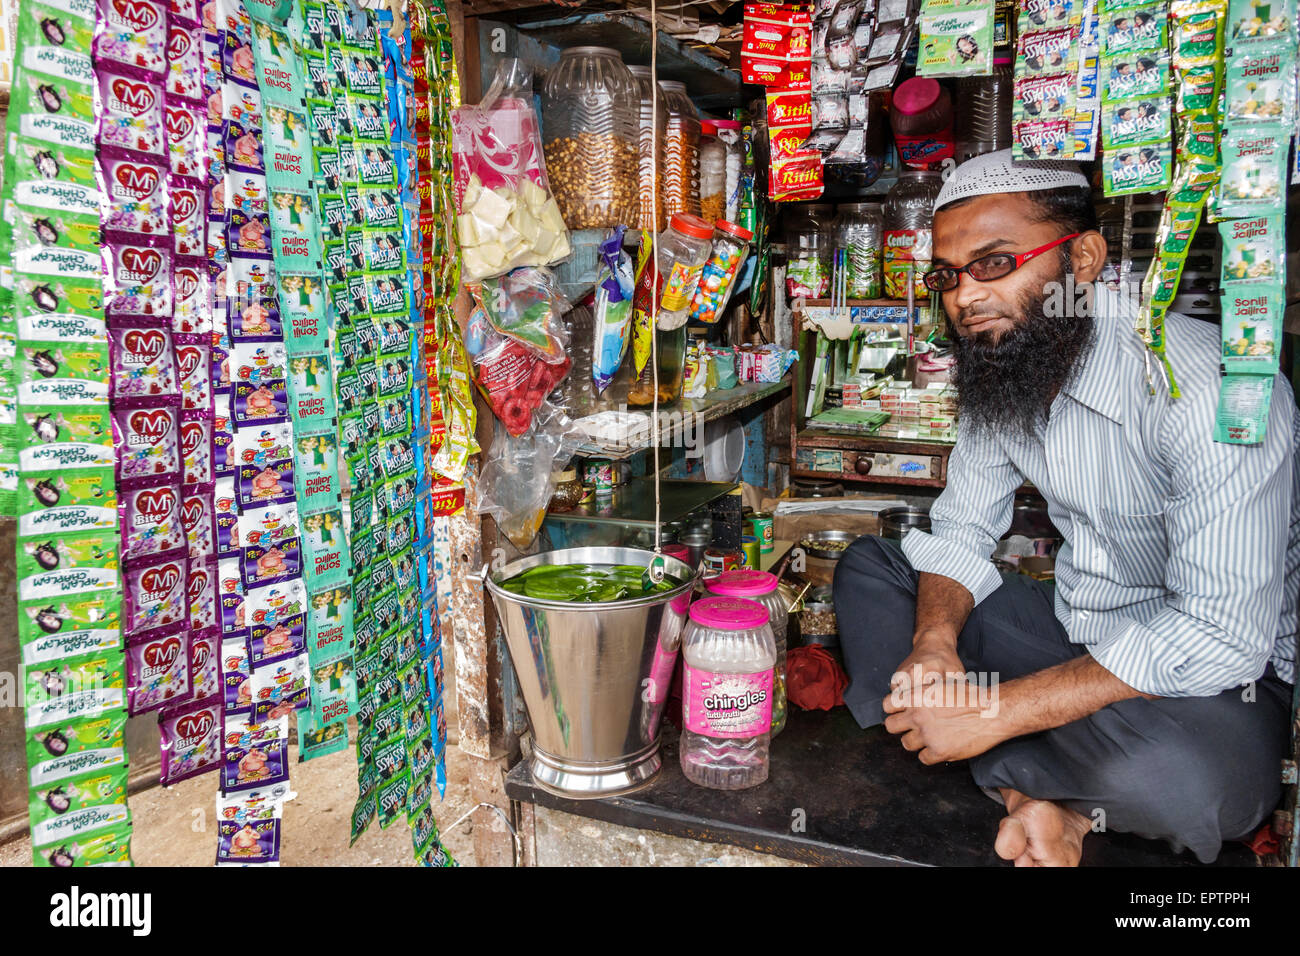 Mumbai India,Dharavi,60 Feet Road,slum,low income,poor,poverty,man men male,Muslim,convenience store,stall,owner,lotions,packets,India150228084 Stock Photo